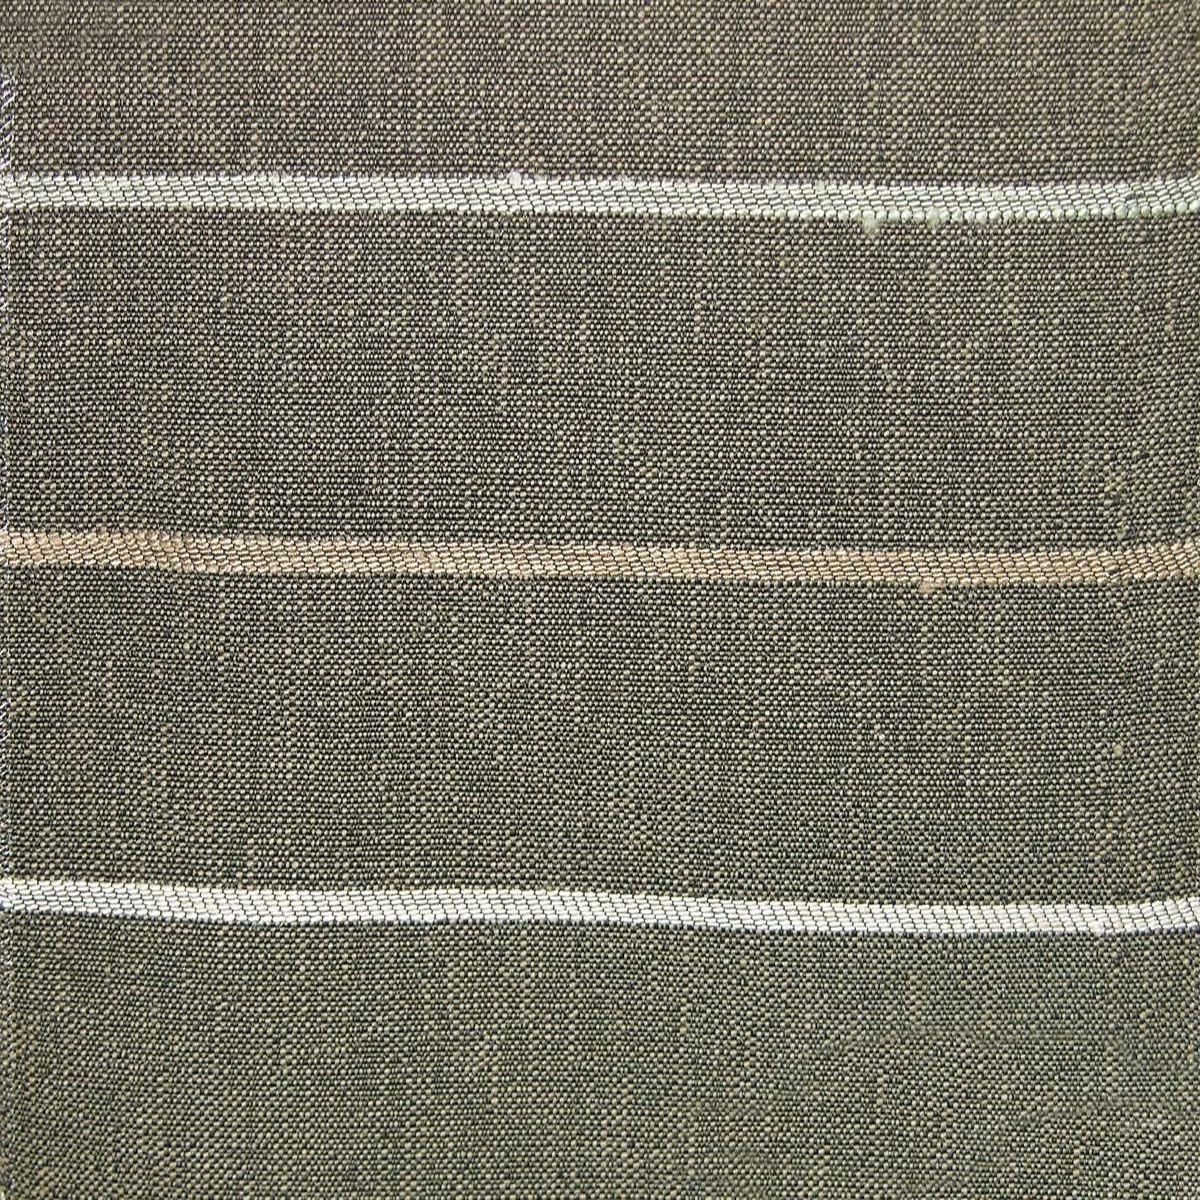 Calabria Stripe fabric in seafoam/tan color - pattern number VN 06630966 - by Scalamandre in the Old World Weavers collection